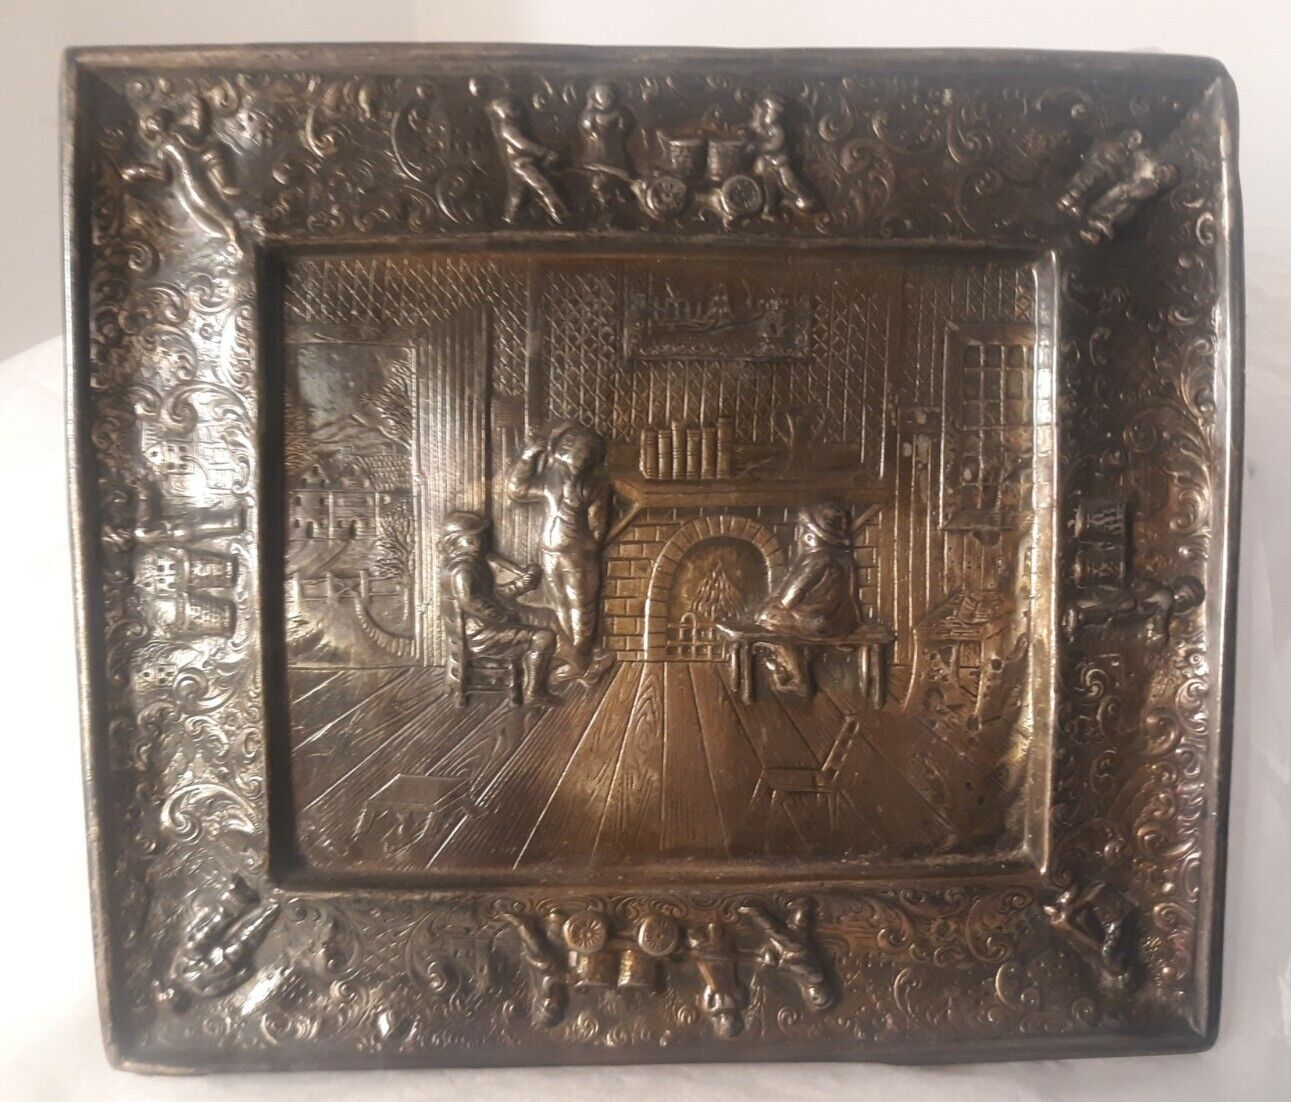 Barbour Silver Company Engraved Plaque Mural Villagers Vtg Antique Wall Decor